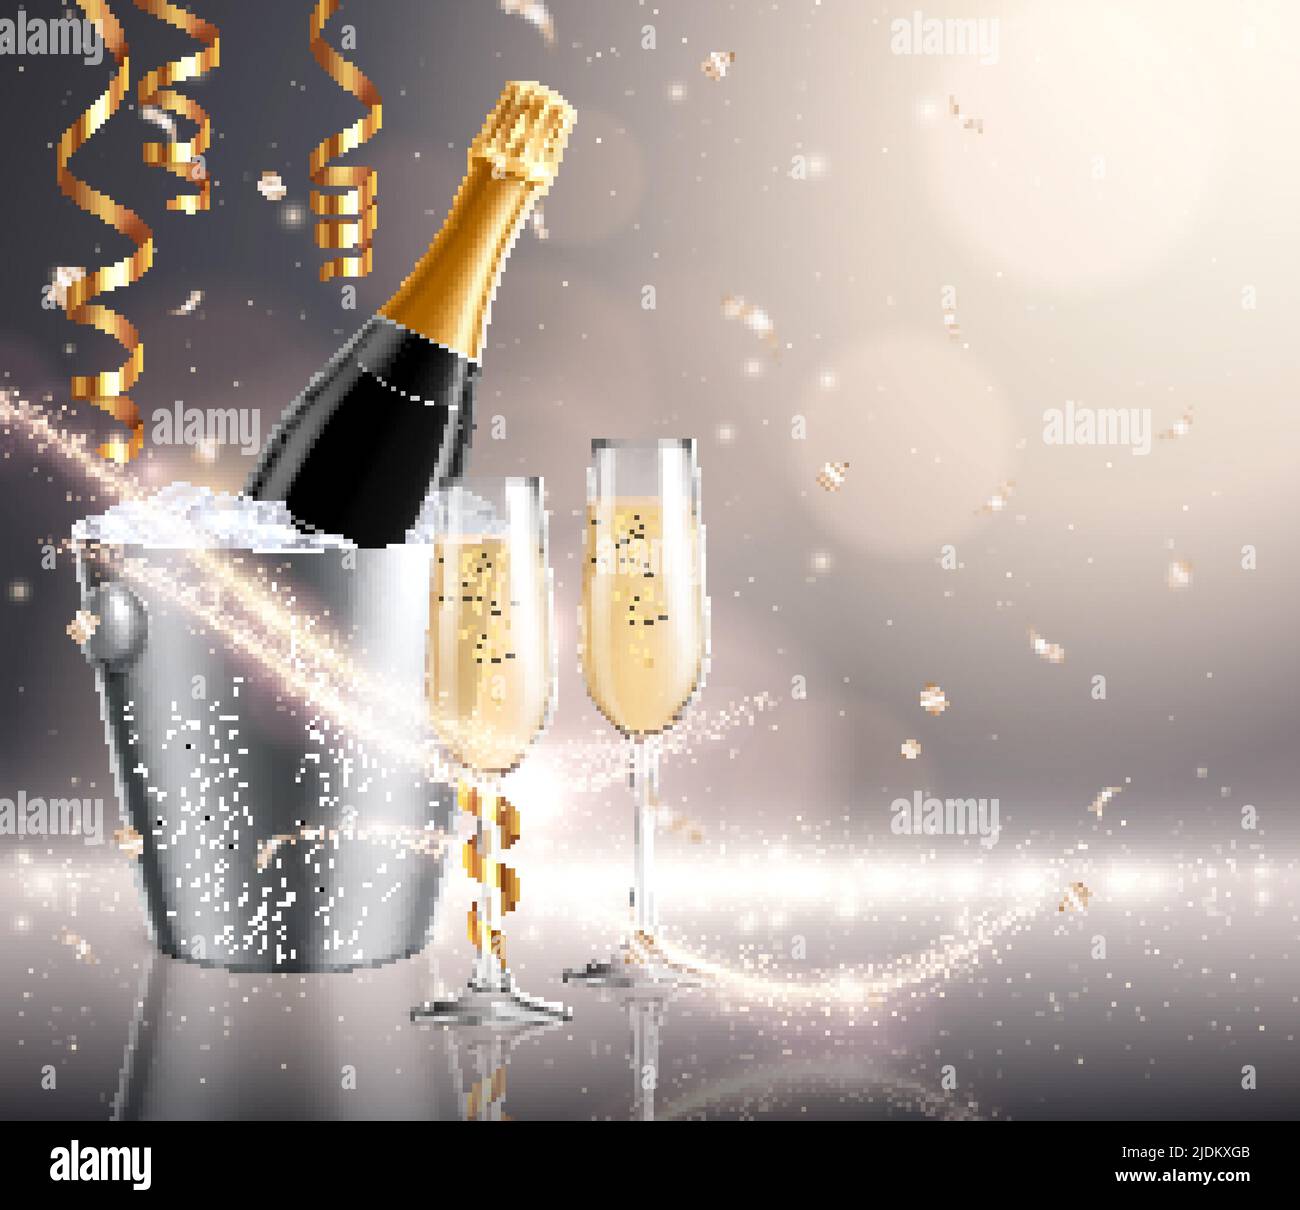 Champagne holiday background composition with realistic images of bucket filled with ice and bottles with drinking glasses vector illustration Stock Vector